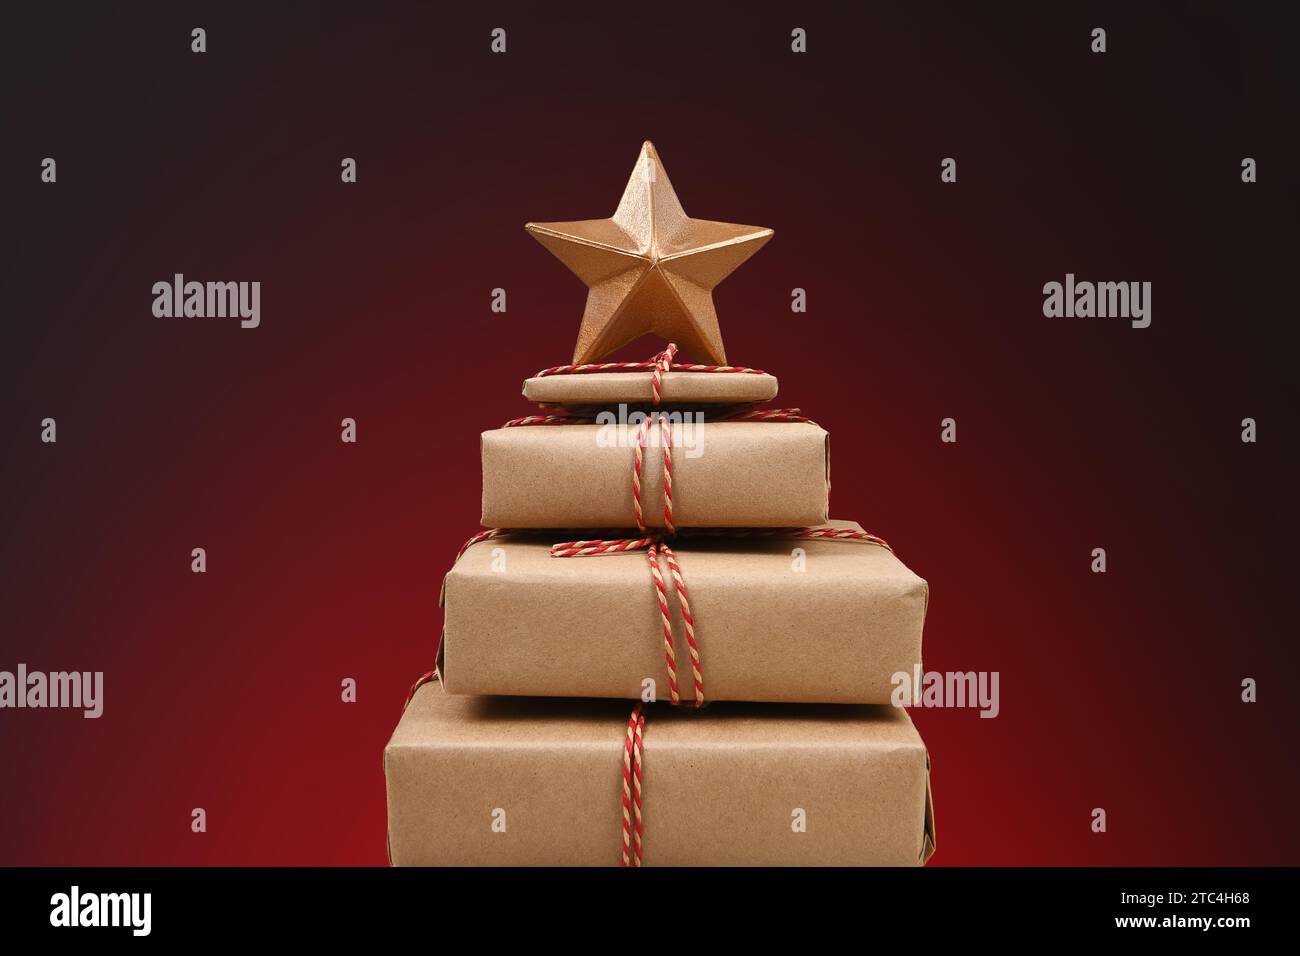 A stack of plain paper wrapped christmas presents on tied with twine and a gold star on top, against a light to dark red spot background. Stock Photo